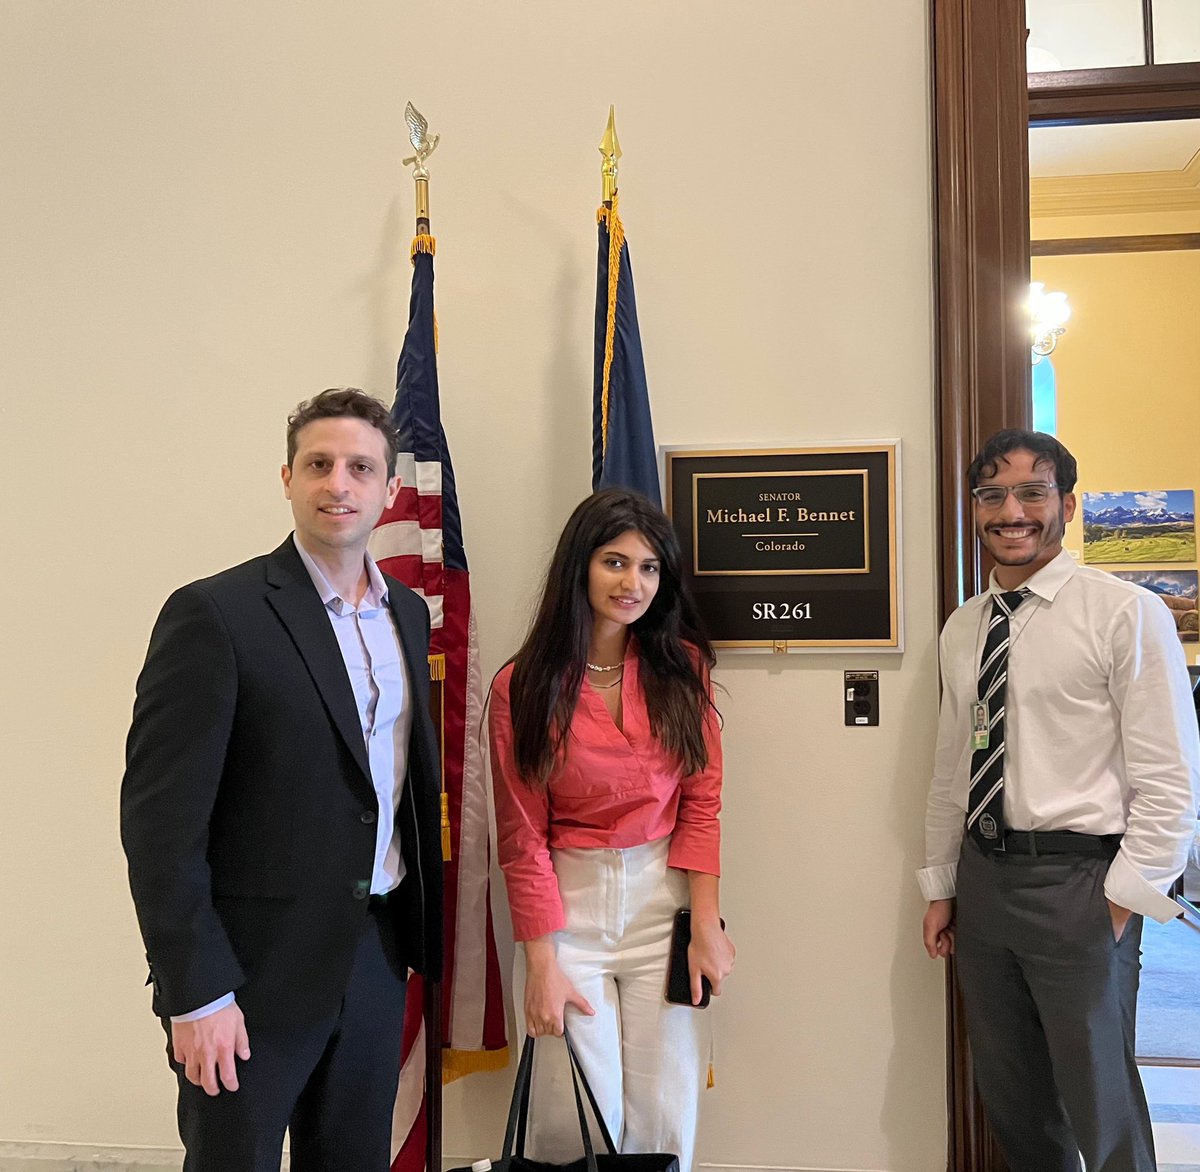 Had productive meeting with @MichaelBennet @SenatorBennet Regarding the #MAHSAAct. September 16th is anniversary of Mahsa Amini death. We expect him to co-sponsor this bill which was introduced by Sen Padilla & Sen Marco Rubio. #S2626